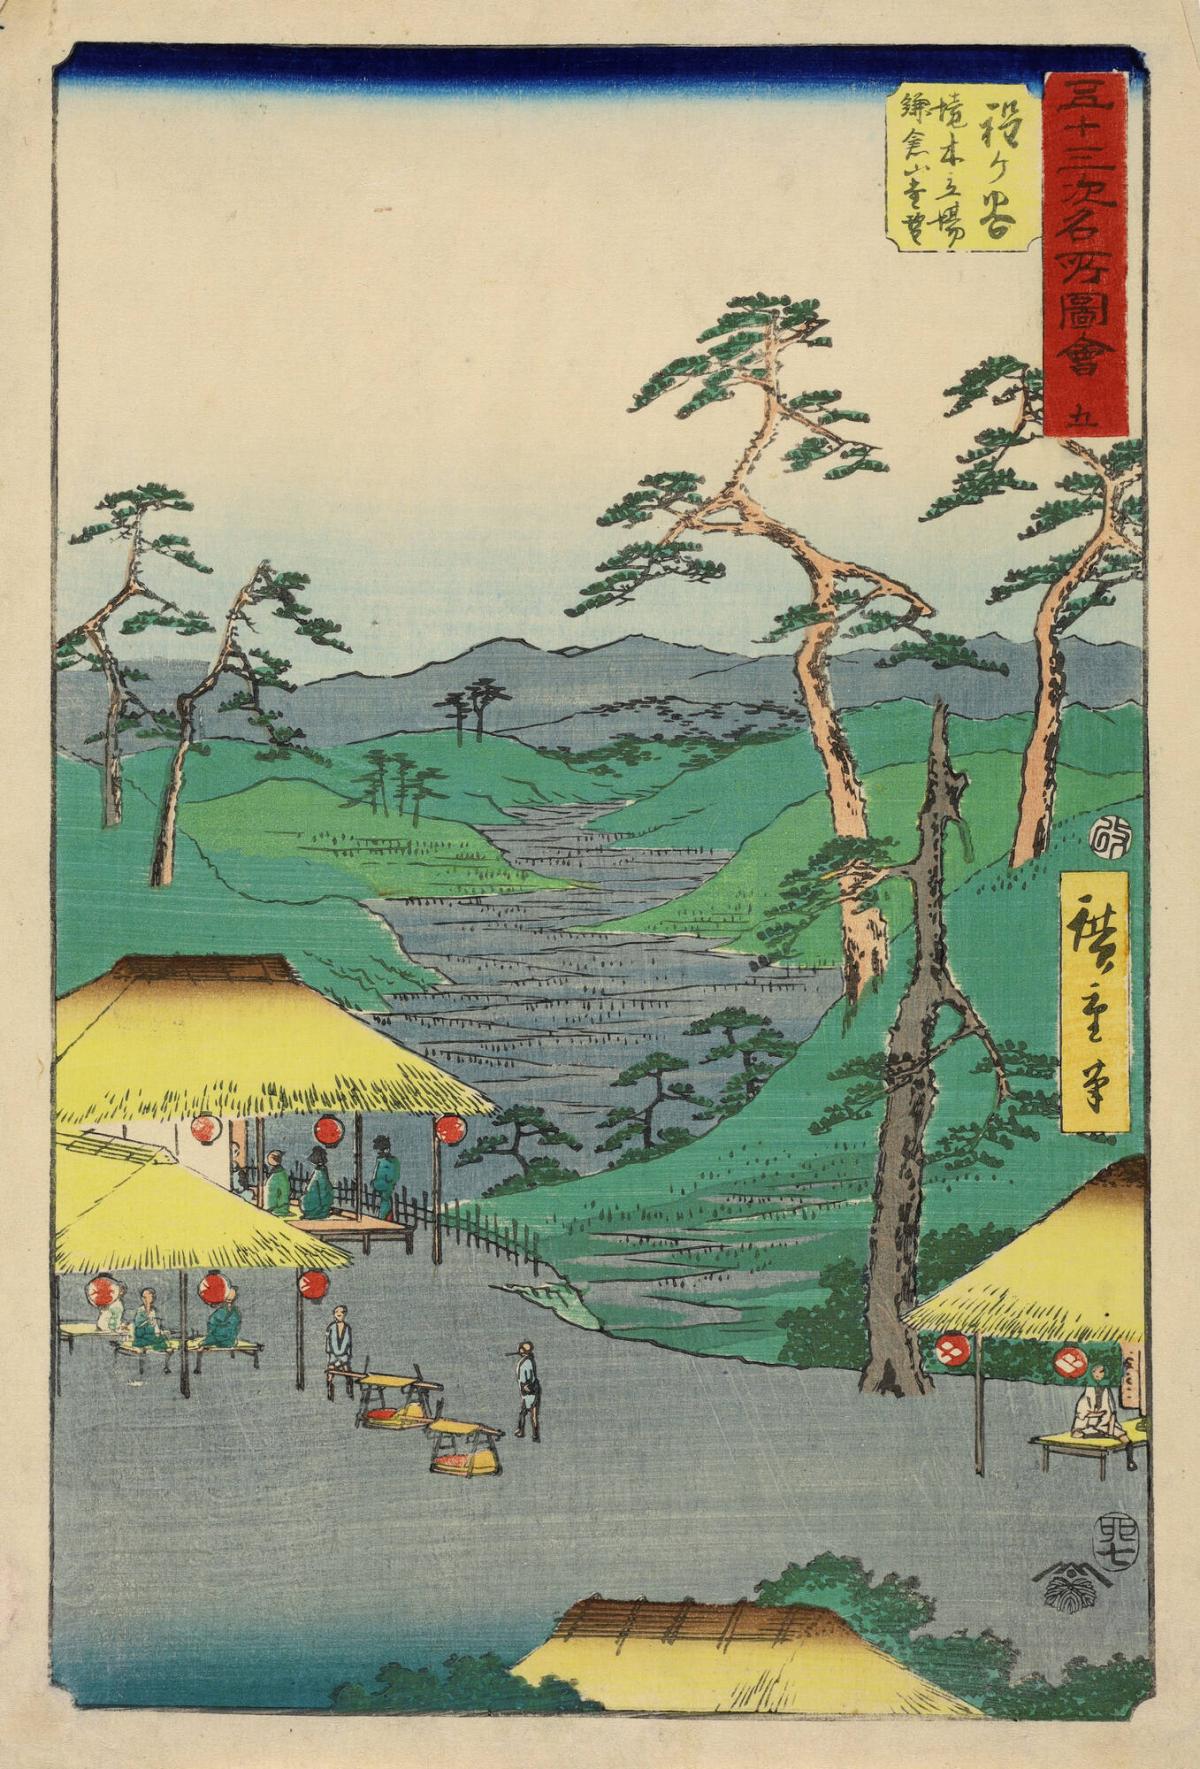 Distant View of the Kamakura Mountains from the Rest House by the Boundary Tree at Hodogaya, no. 5 from the series Pictures of Famous Places of the Fifty-three Stations [of the Tōkaidō]